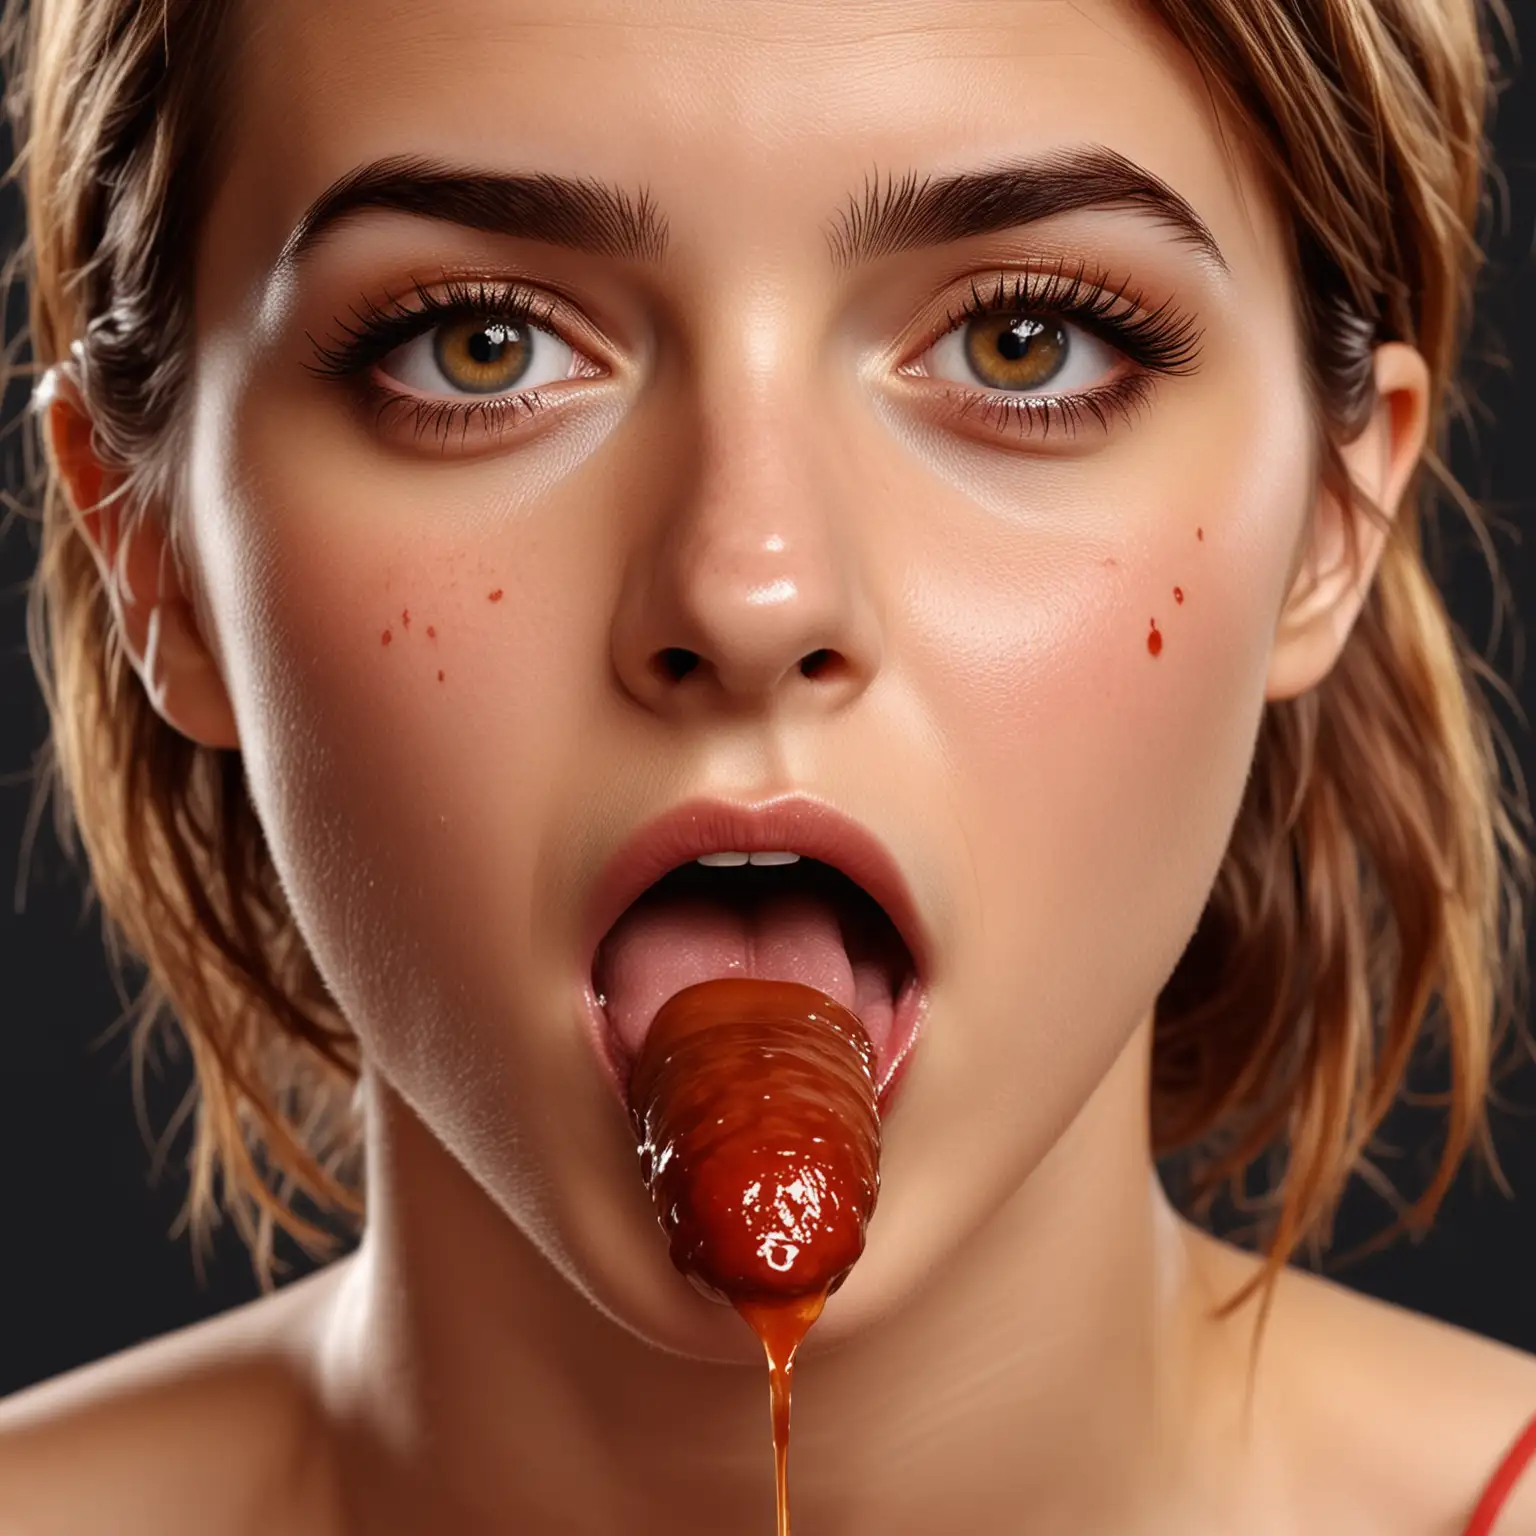 Emma Watson Eating Sausage with Ketchup Dripping Realistic Portrait